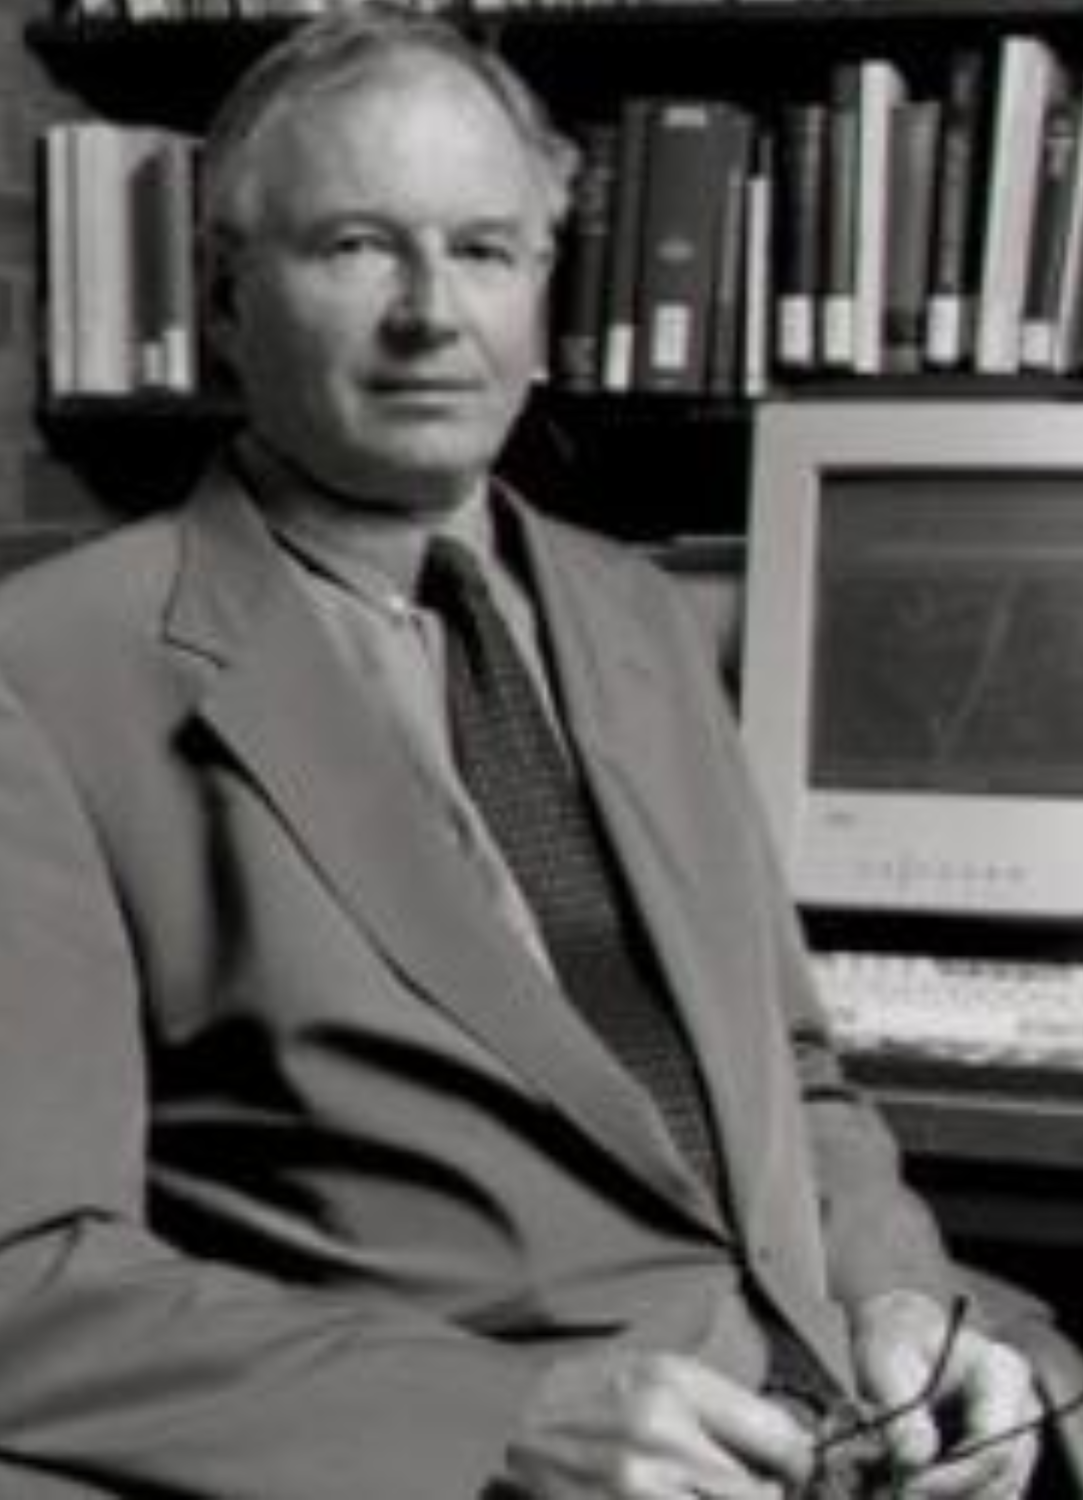 A black and white image of Eugene Vance sitting in front of a computer on a bookcase.